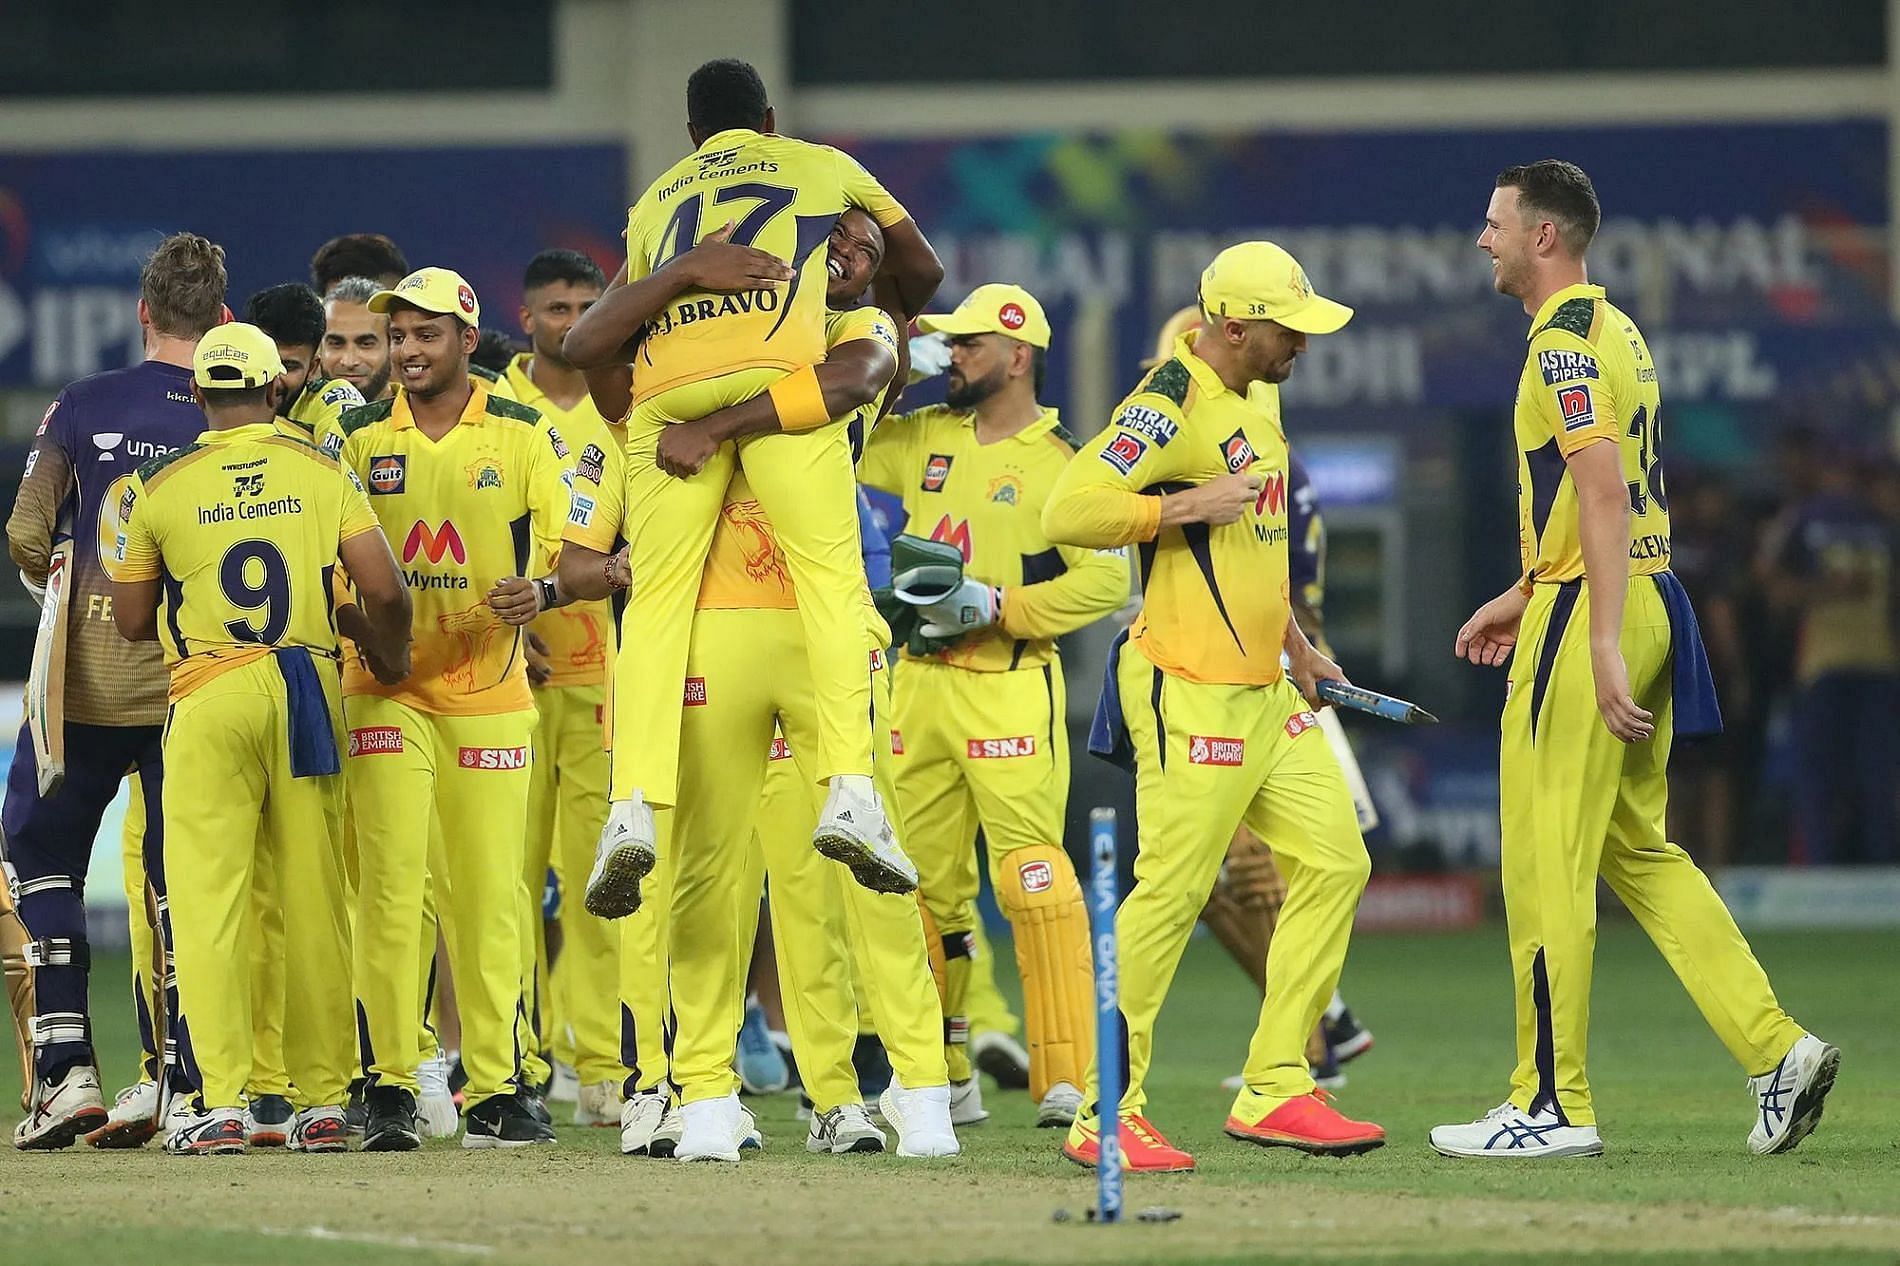 The Chennai Super Kings are placed in Group B for IPL 2022 [P/C: iplt20.com]